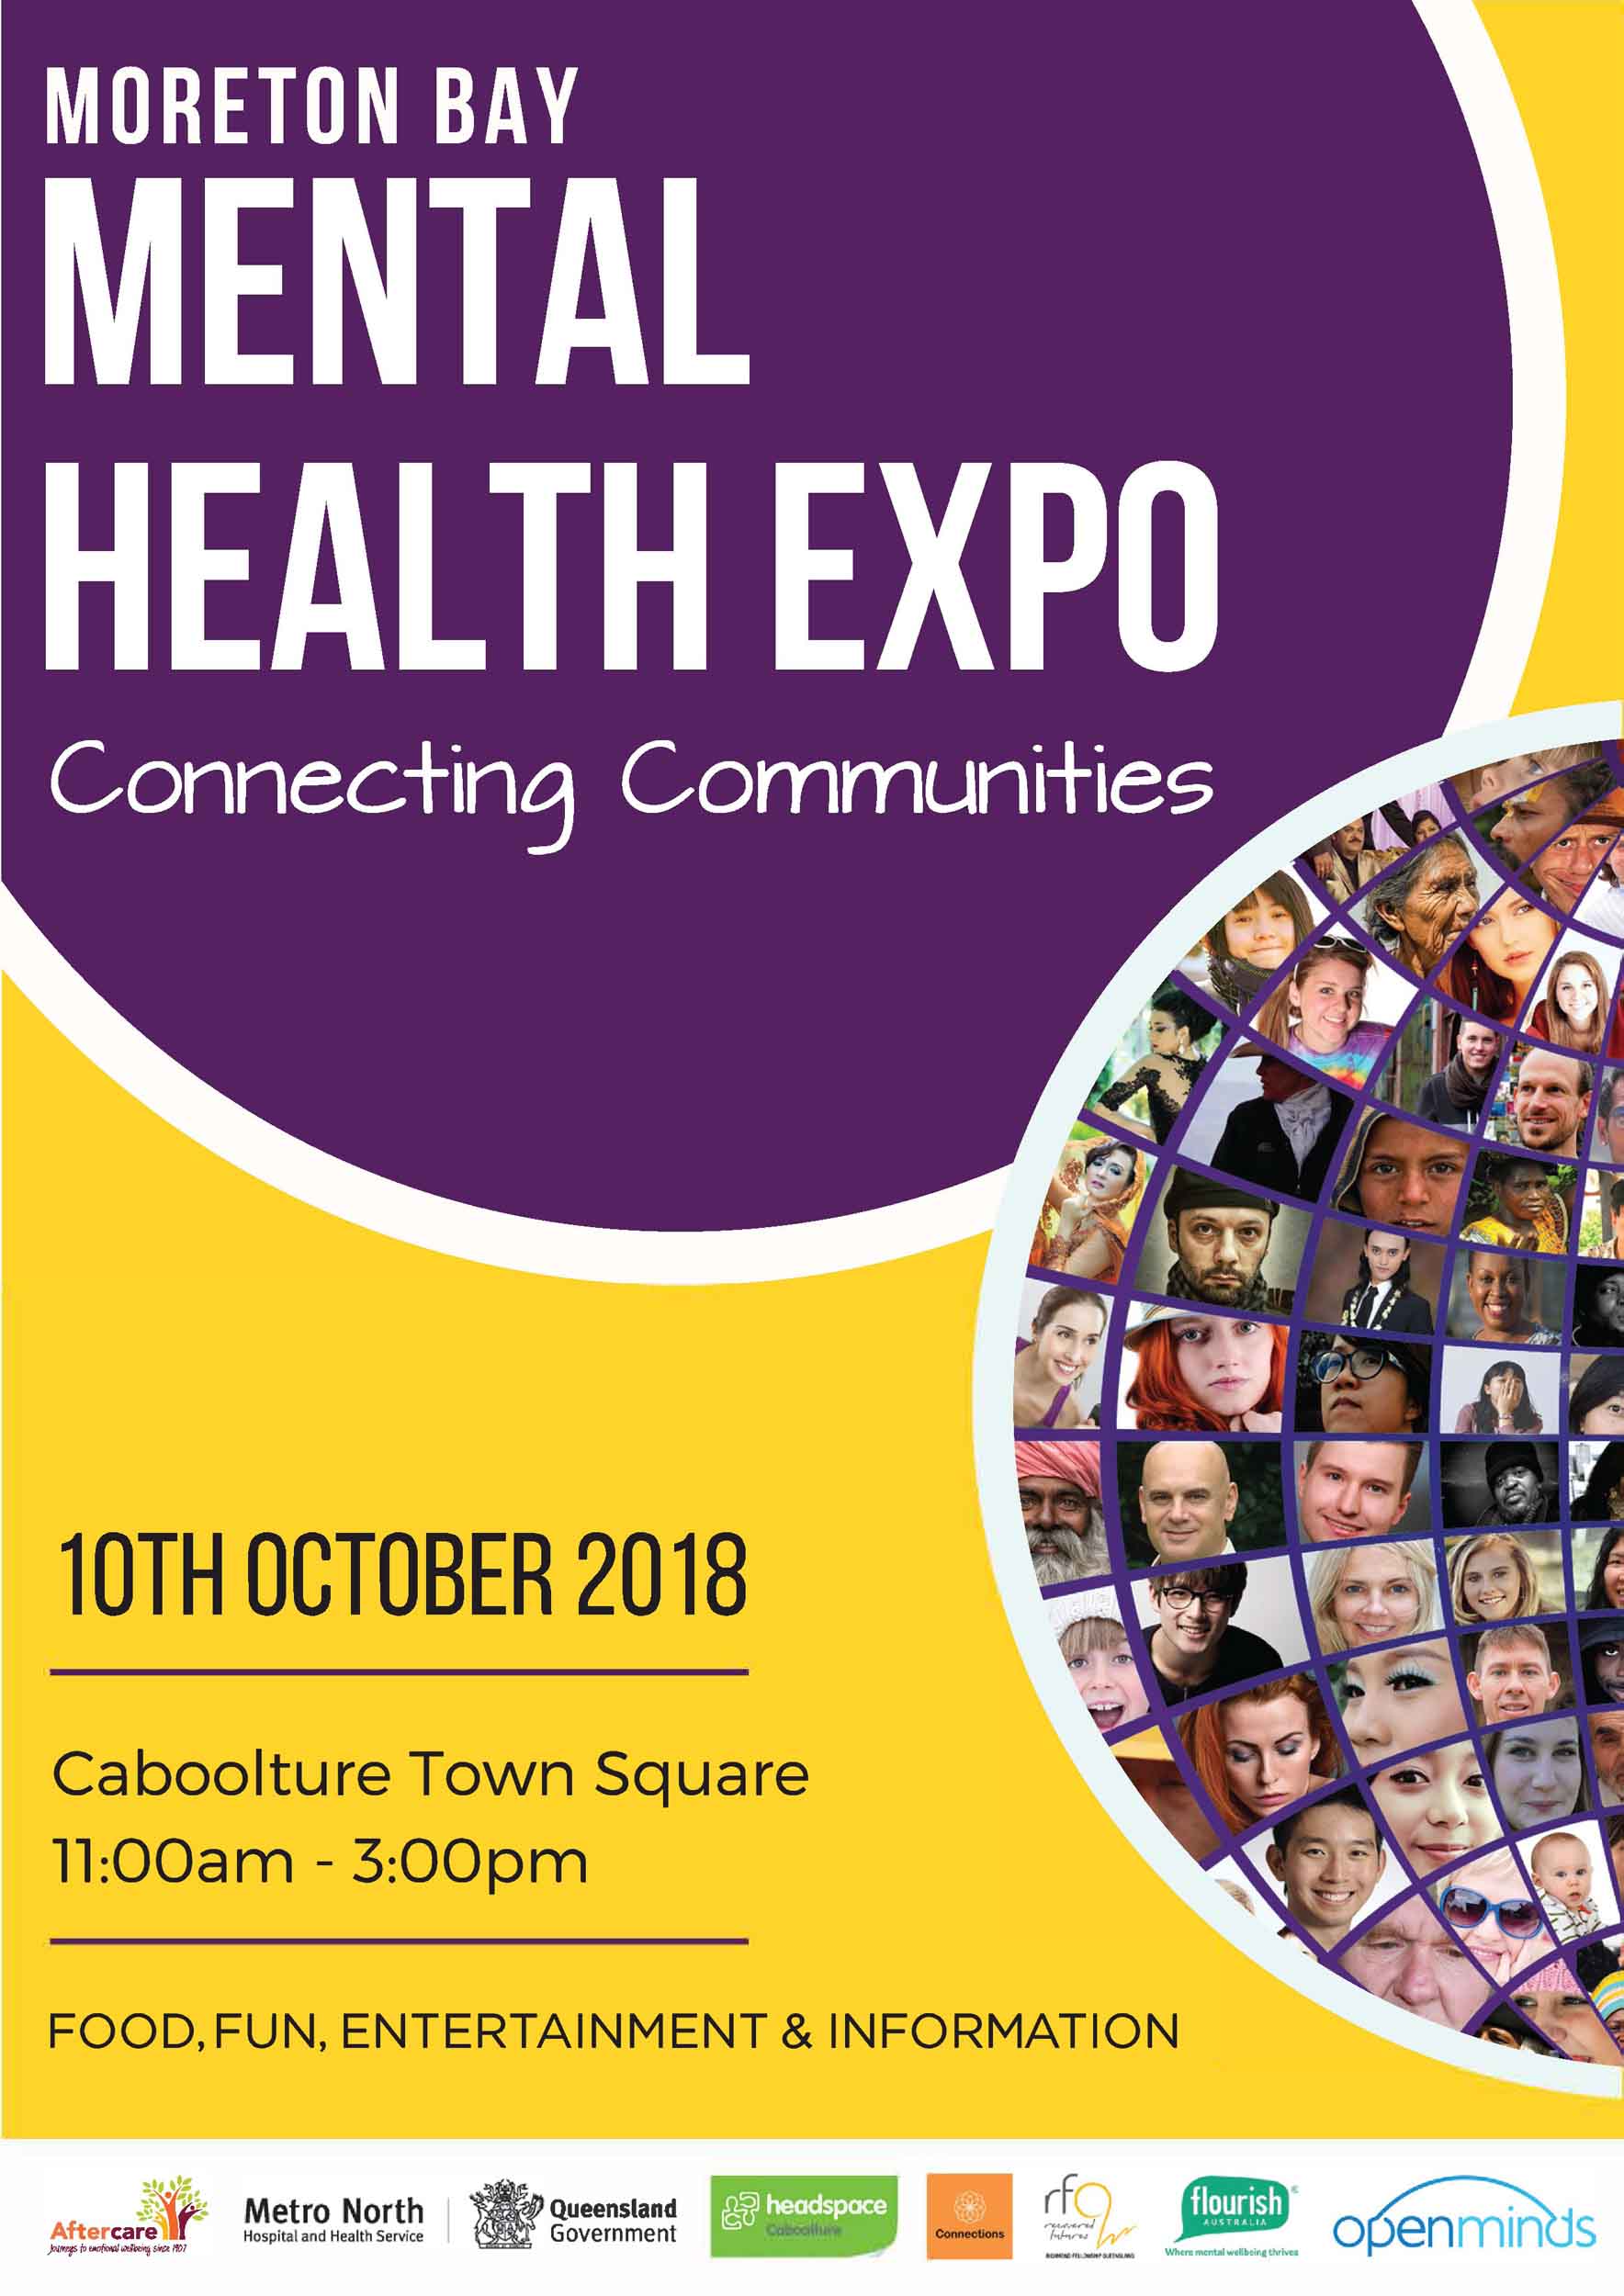 The Moreton Bay Mental Health Expo is on Wednesday 10 October, 2018